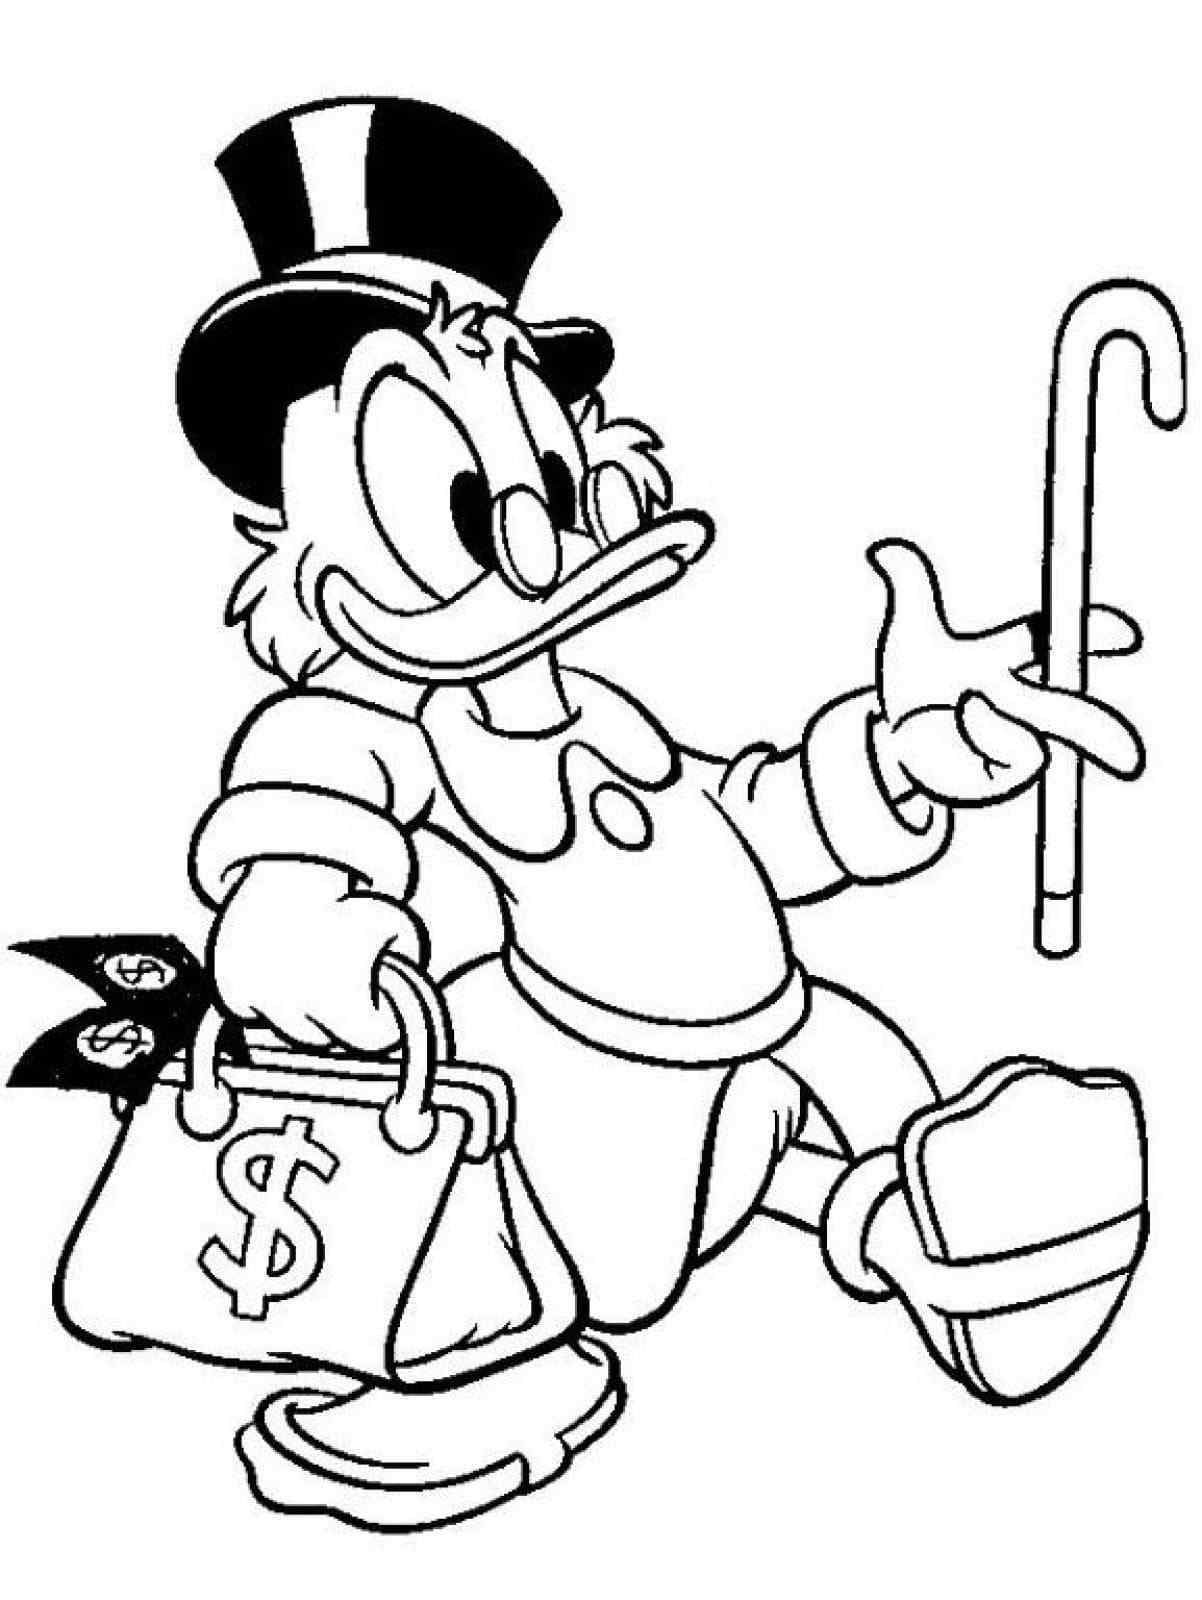 Donald With A Suitcase Of Money